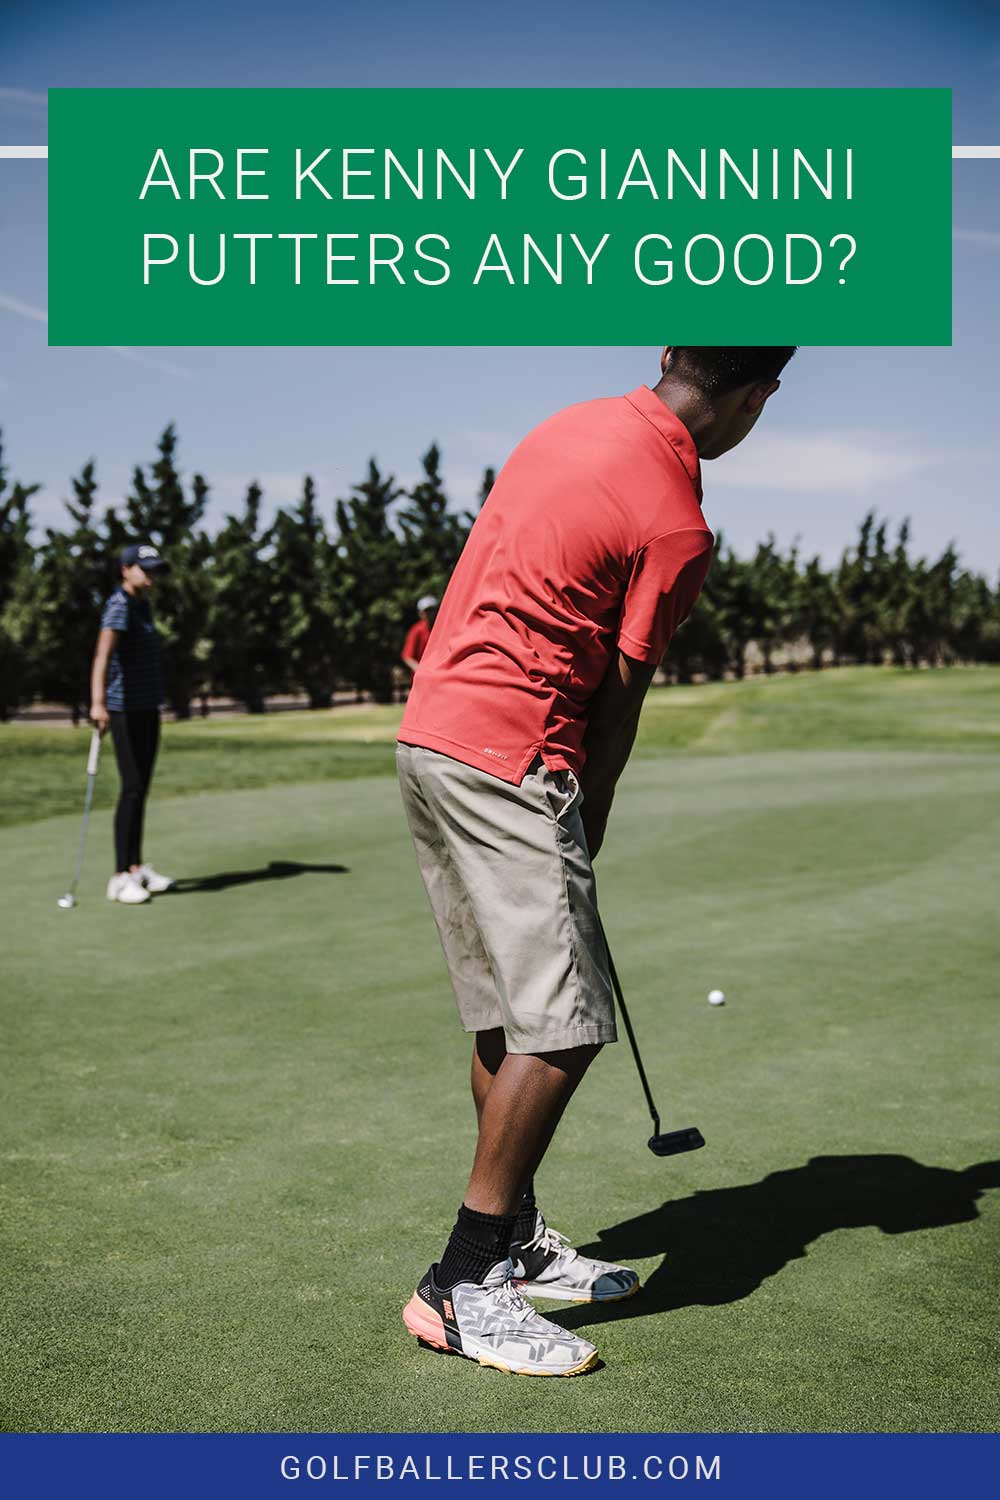 Man in red T-shirt playing golf - Are Kenny Giannini Putters Any Good?